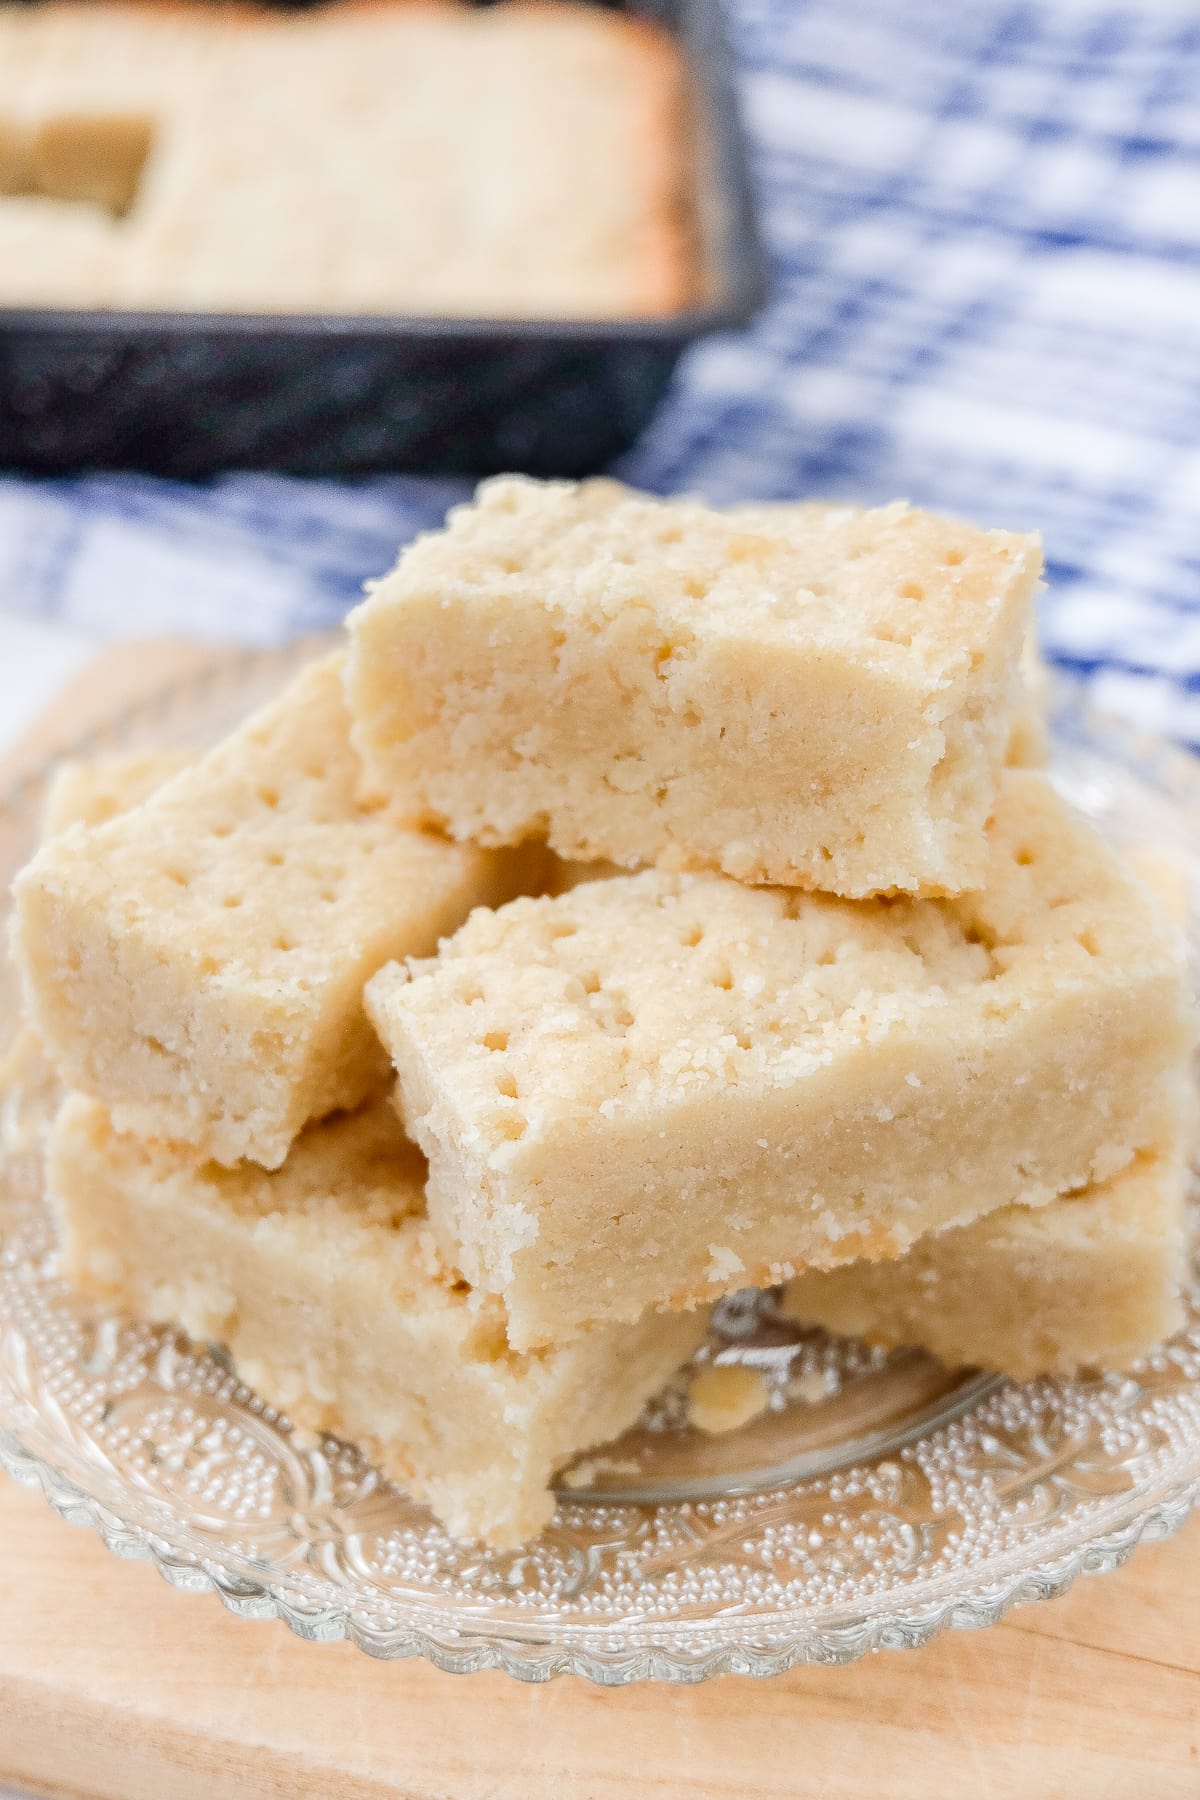 Crumbly Scottish Shortbread - Recipes From Europe